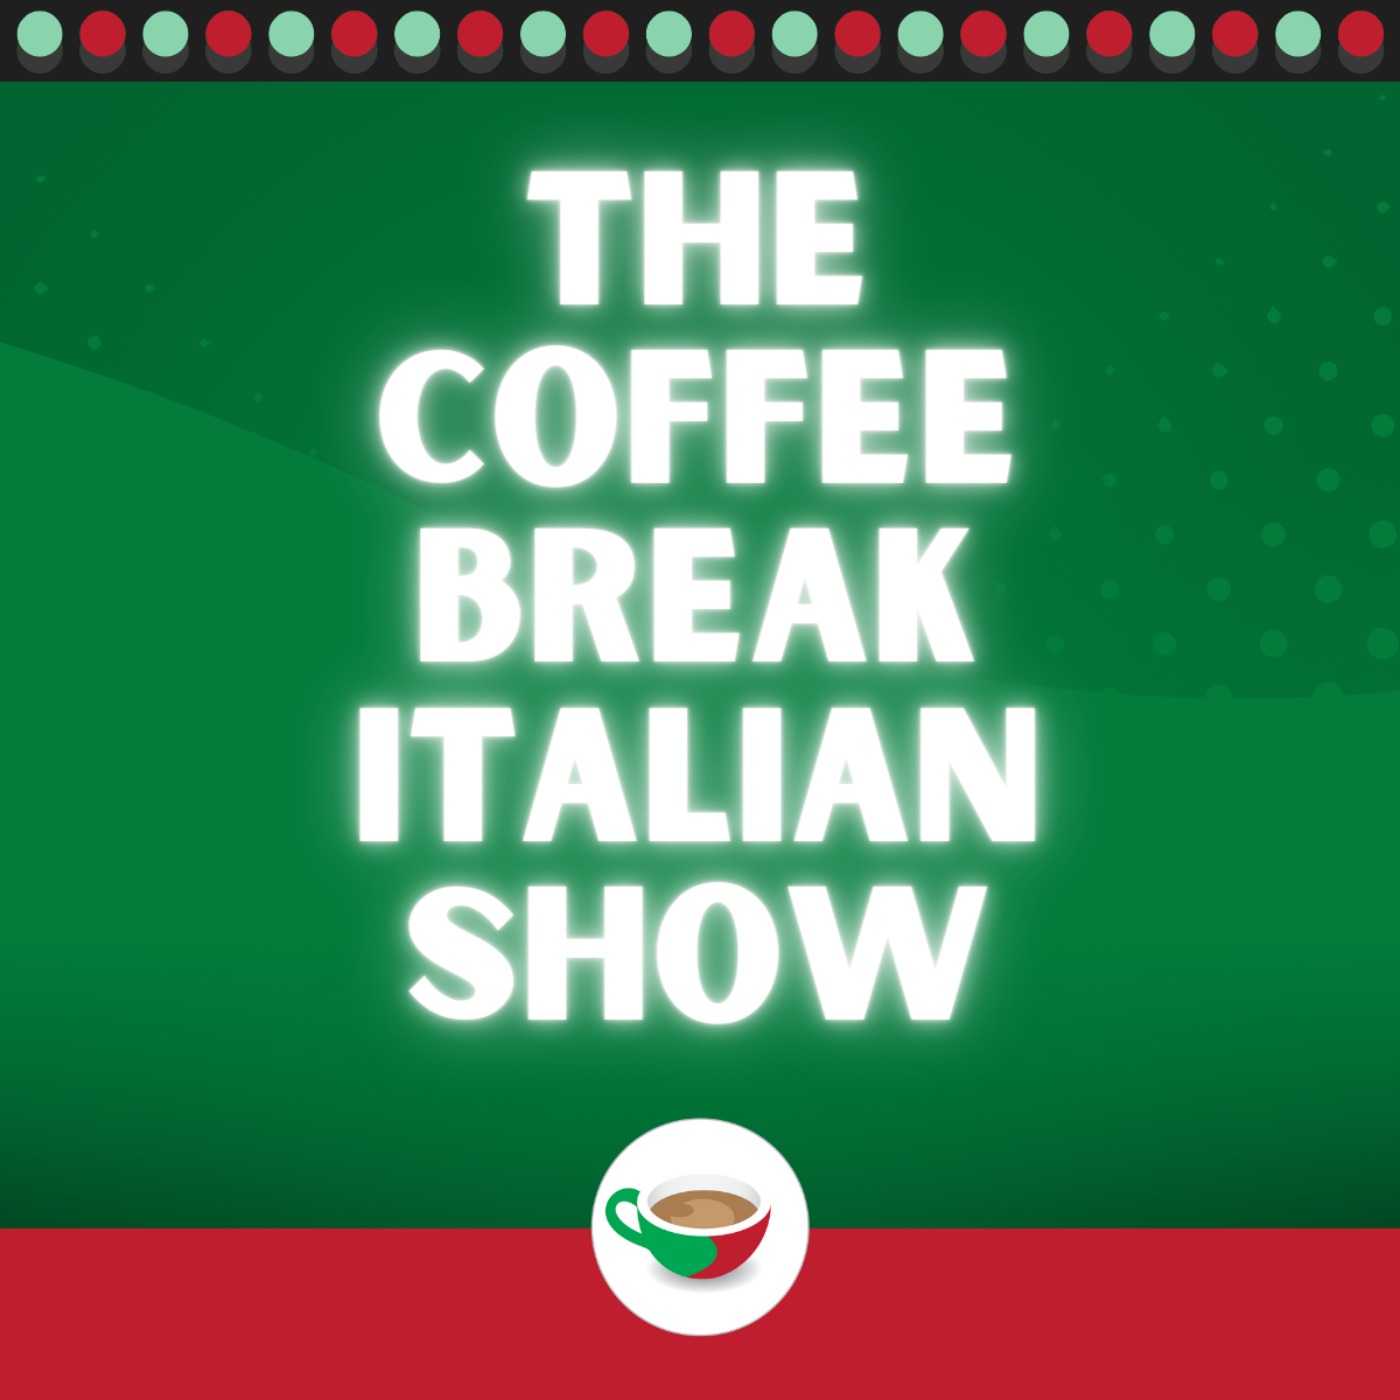 How to apologise, excuse yourself and ask for permission in Italian | The Coffee Break Italian Show 1.09